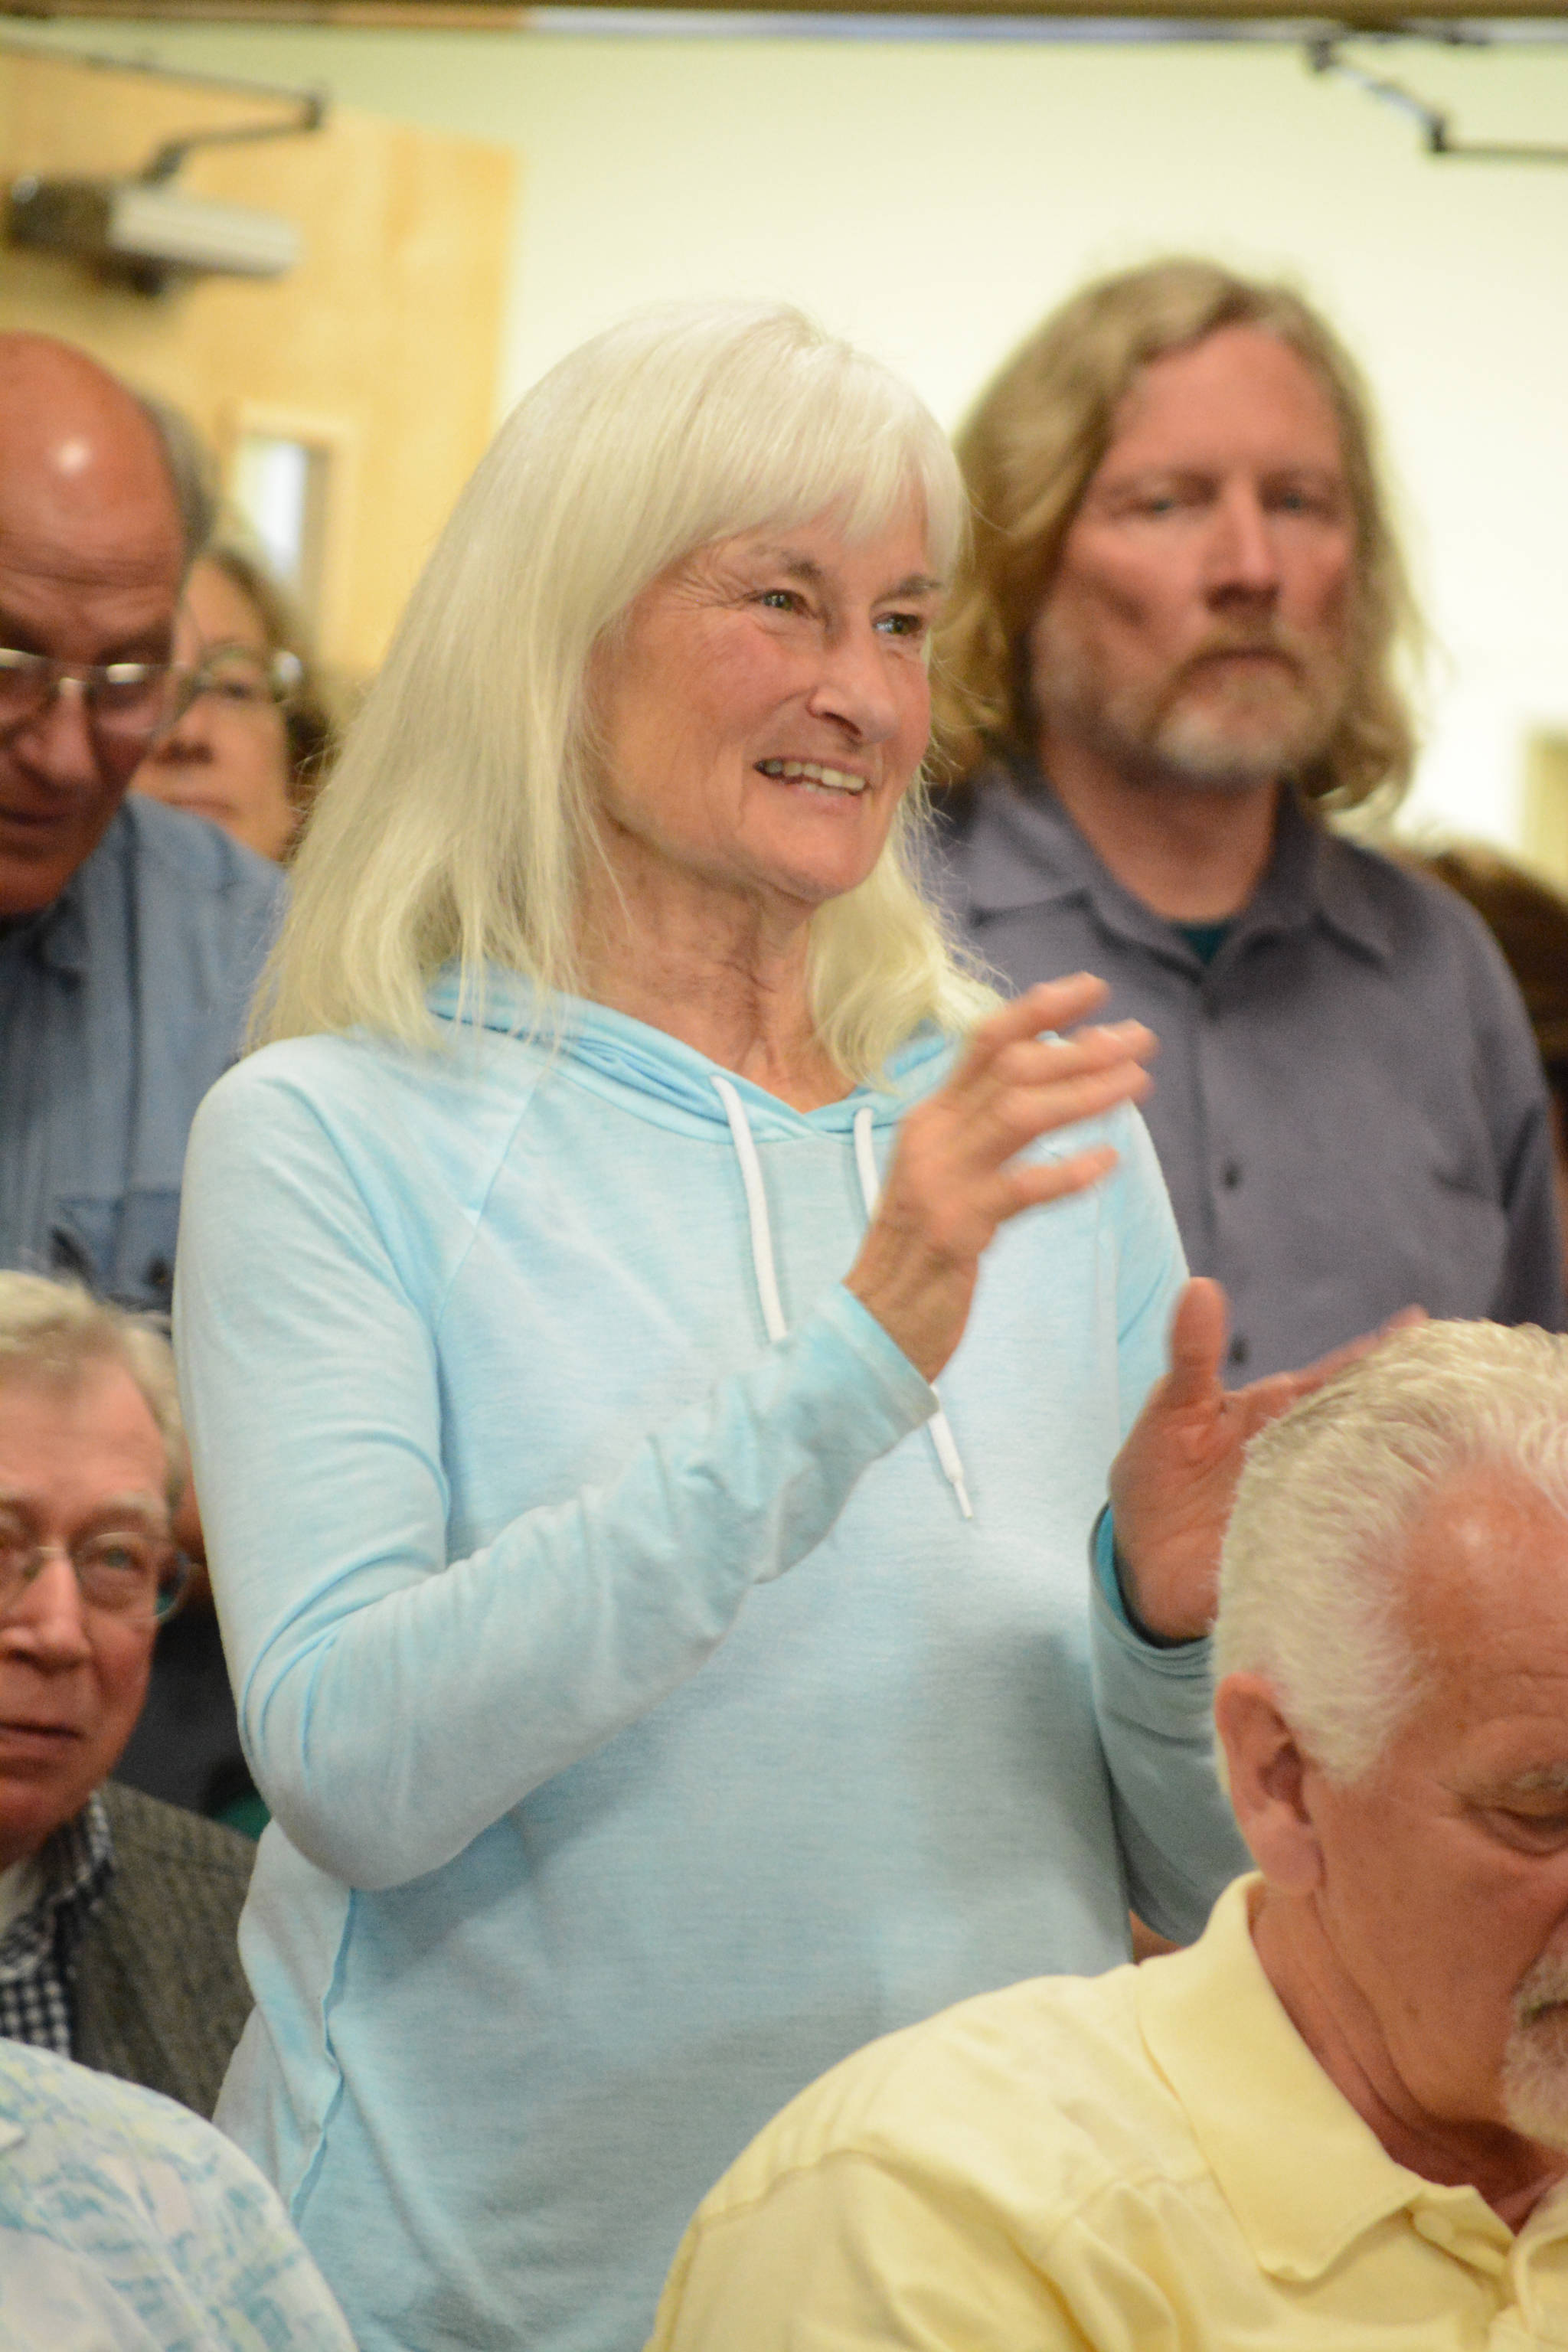 Homer resident Carla Stanley asks a question of Sen. Lisa Murkowski, R-Alaska, at a town hall meeting on health care Friday, July 7, 2017, at Homer City Hall. About 150 packed the Cowles Council Chambers to share their concerns about health care.